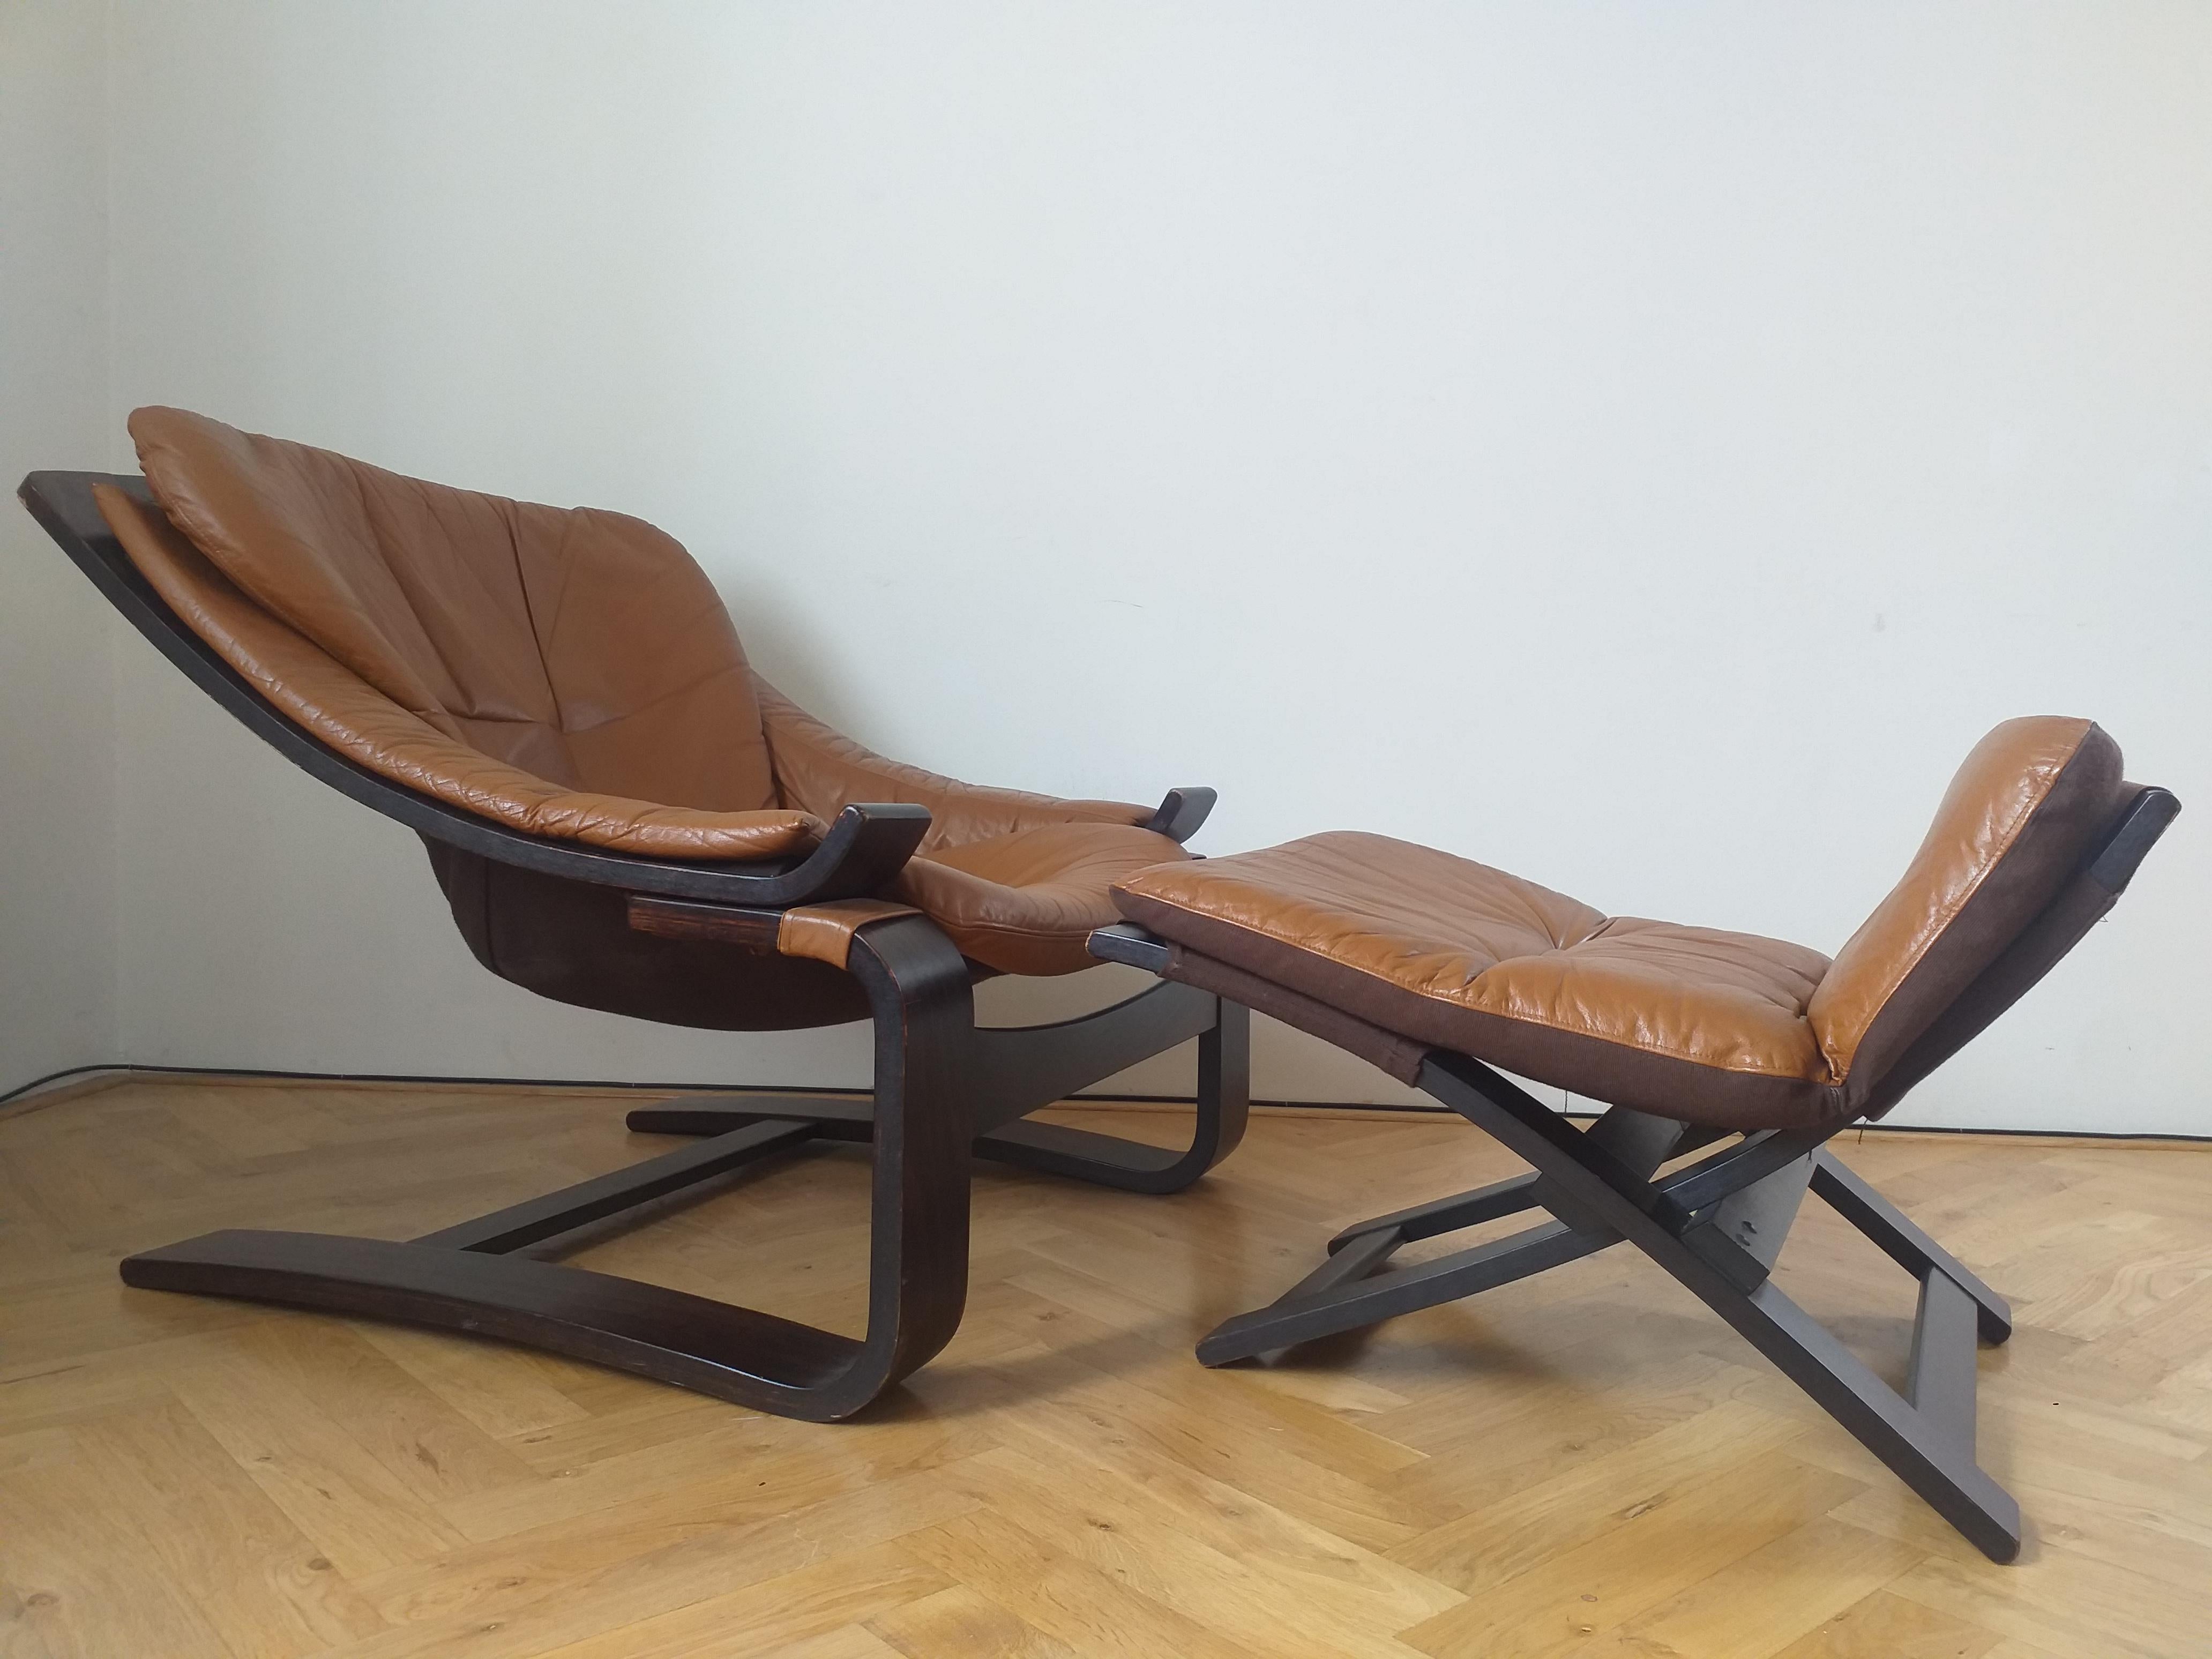 Midcentury Lounge Chair Kroken with Ottoman, Ake Fribytter, Nelo, Sweden, 1970s For Sale 3